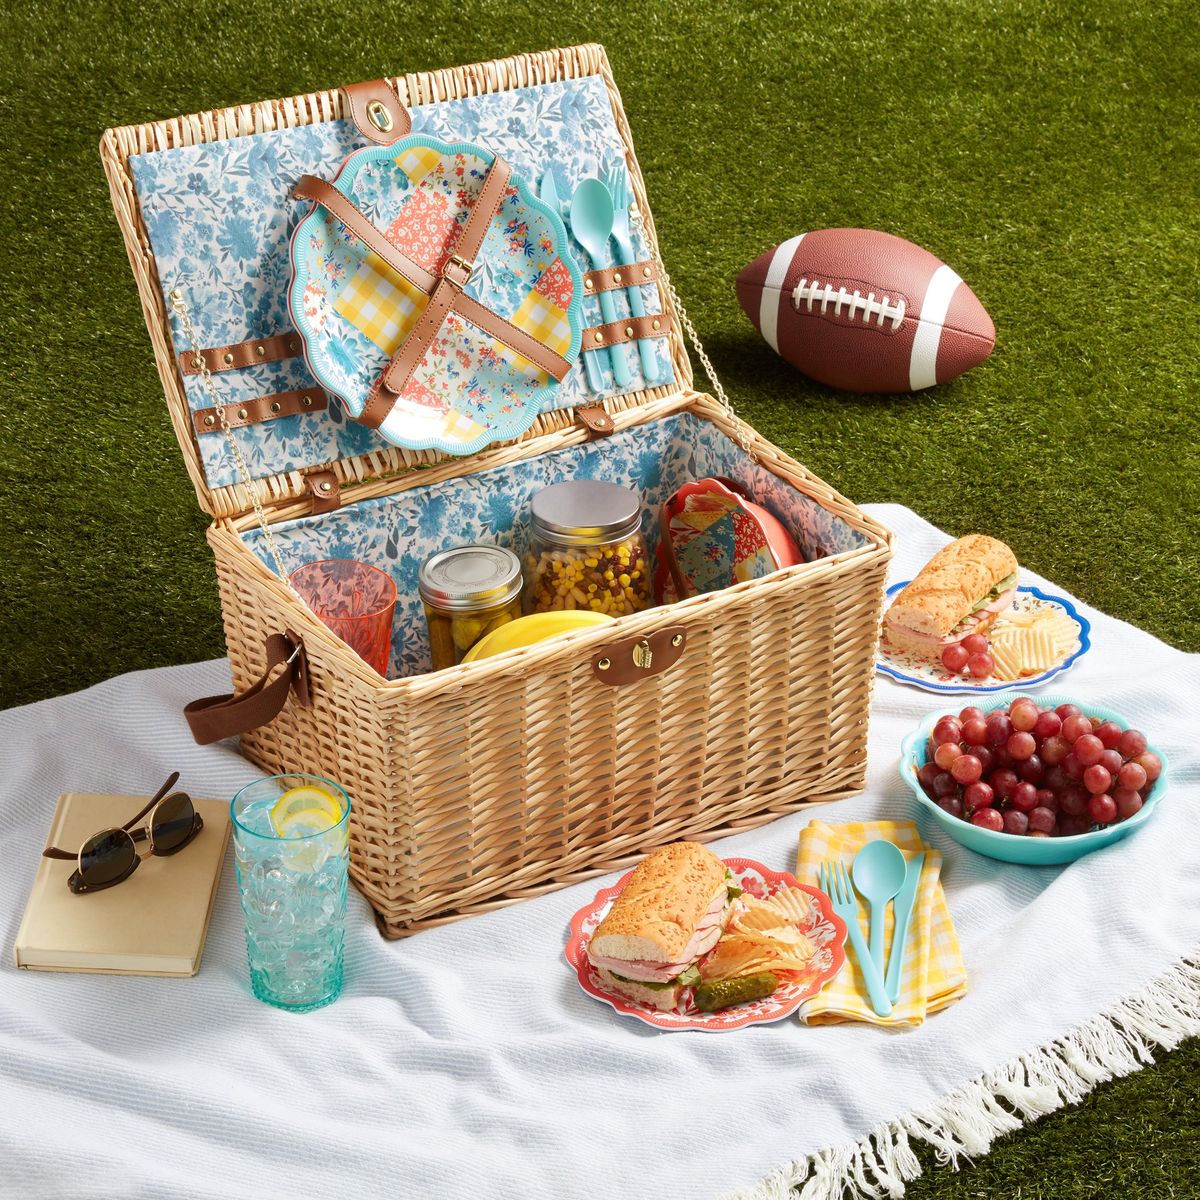 https://hips.hearstapps.com/hmg-prod/images/the-pioneer-woman-picnic-basket-1650319485.jpeg?crop=1.00xw:1.00xh;0,0&resize=1200:*